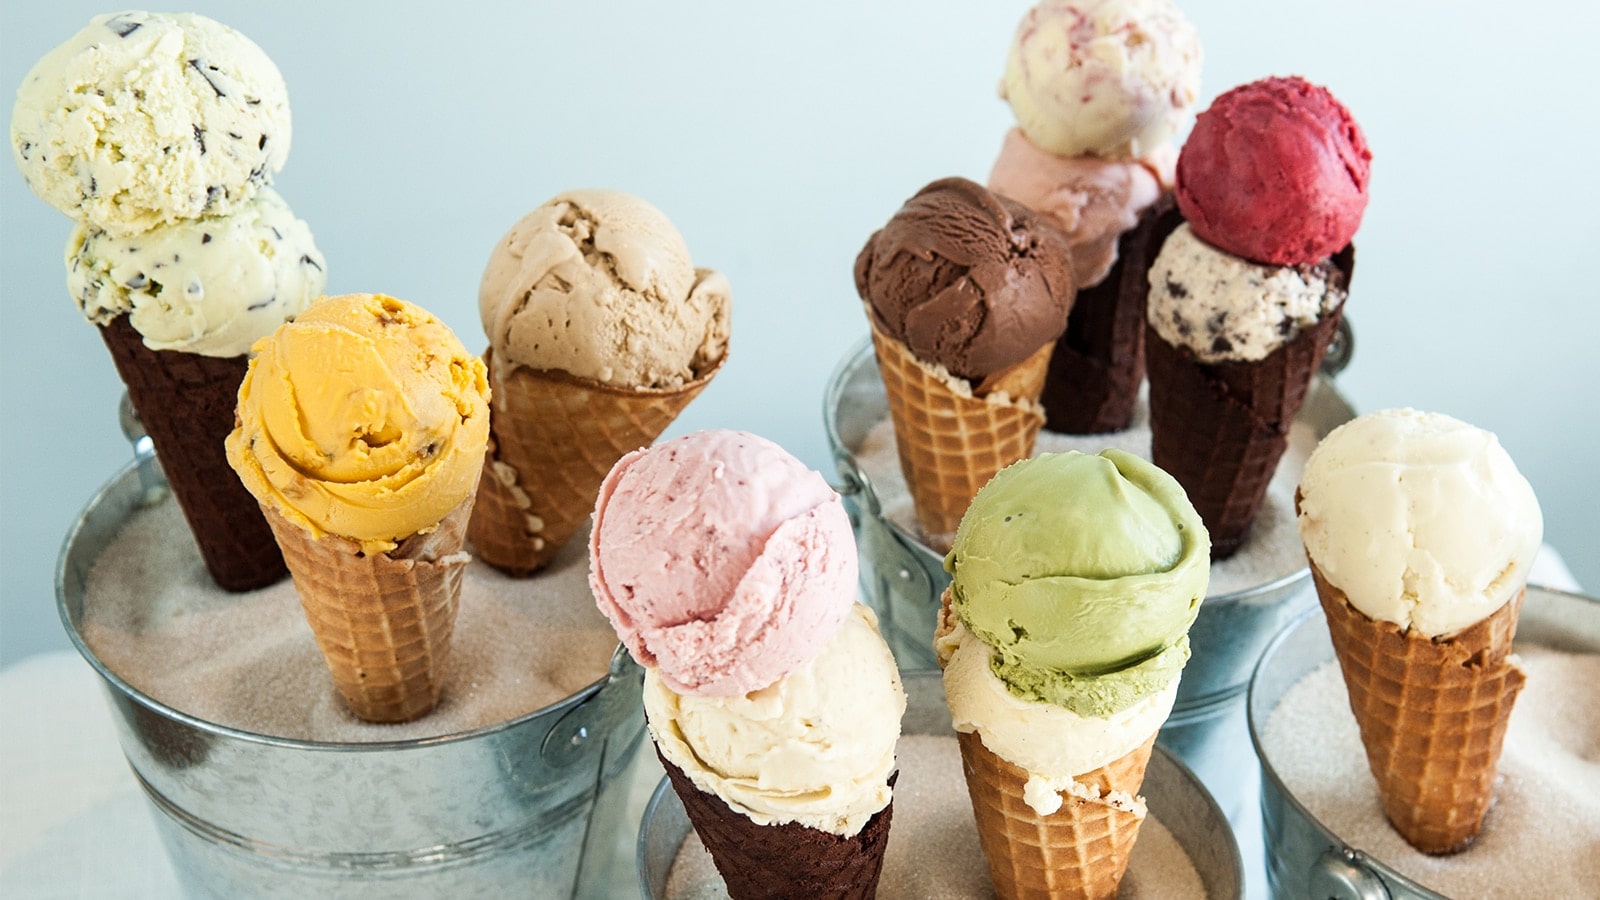 Top 6 Well Known Ice Cream Brands In India